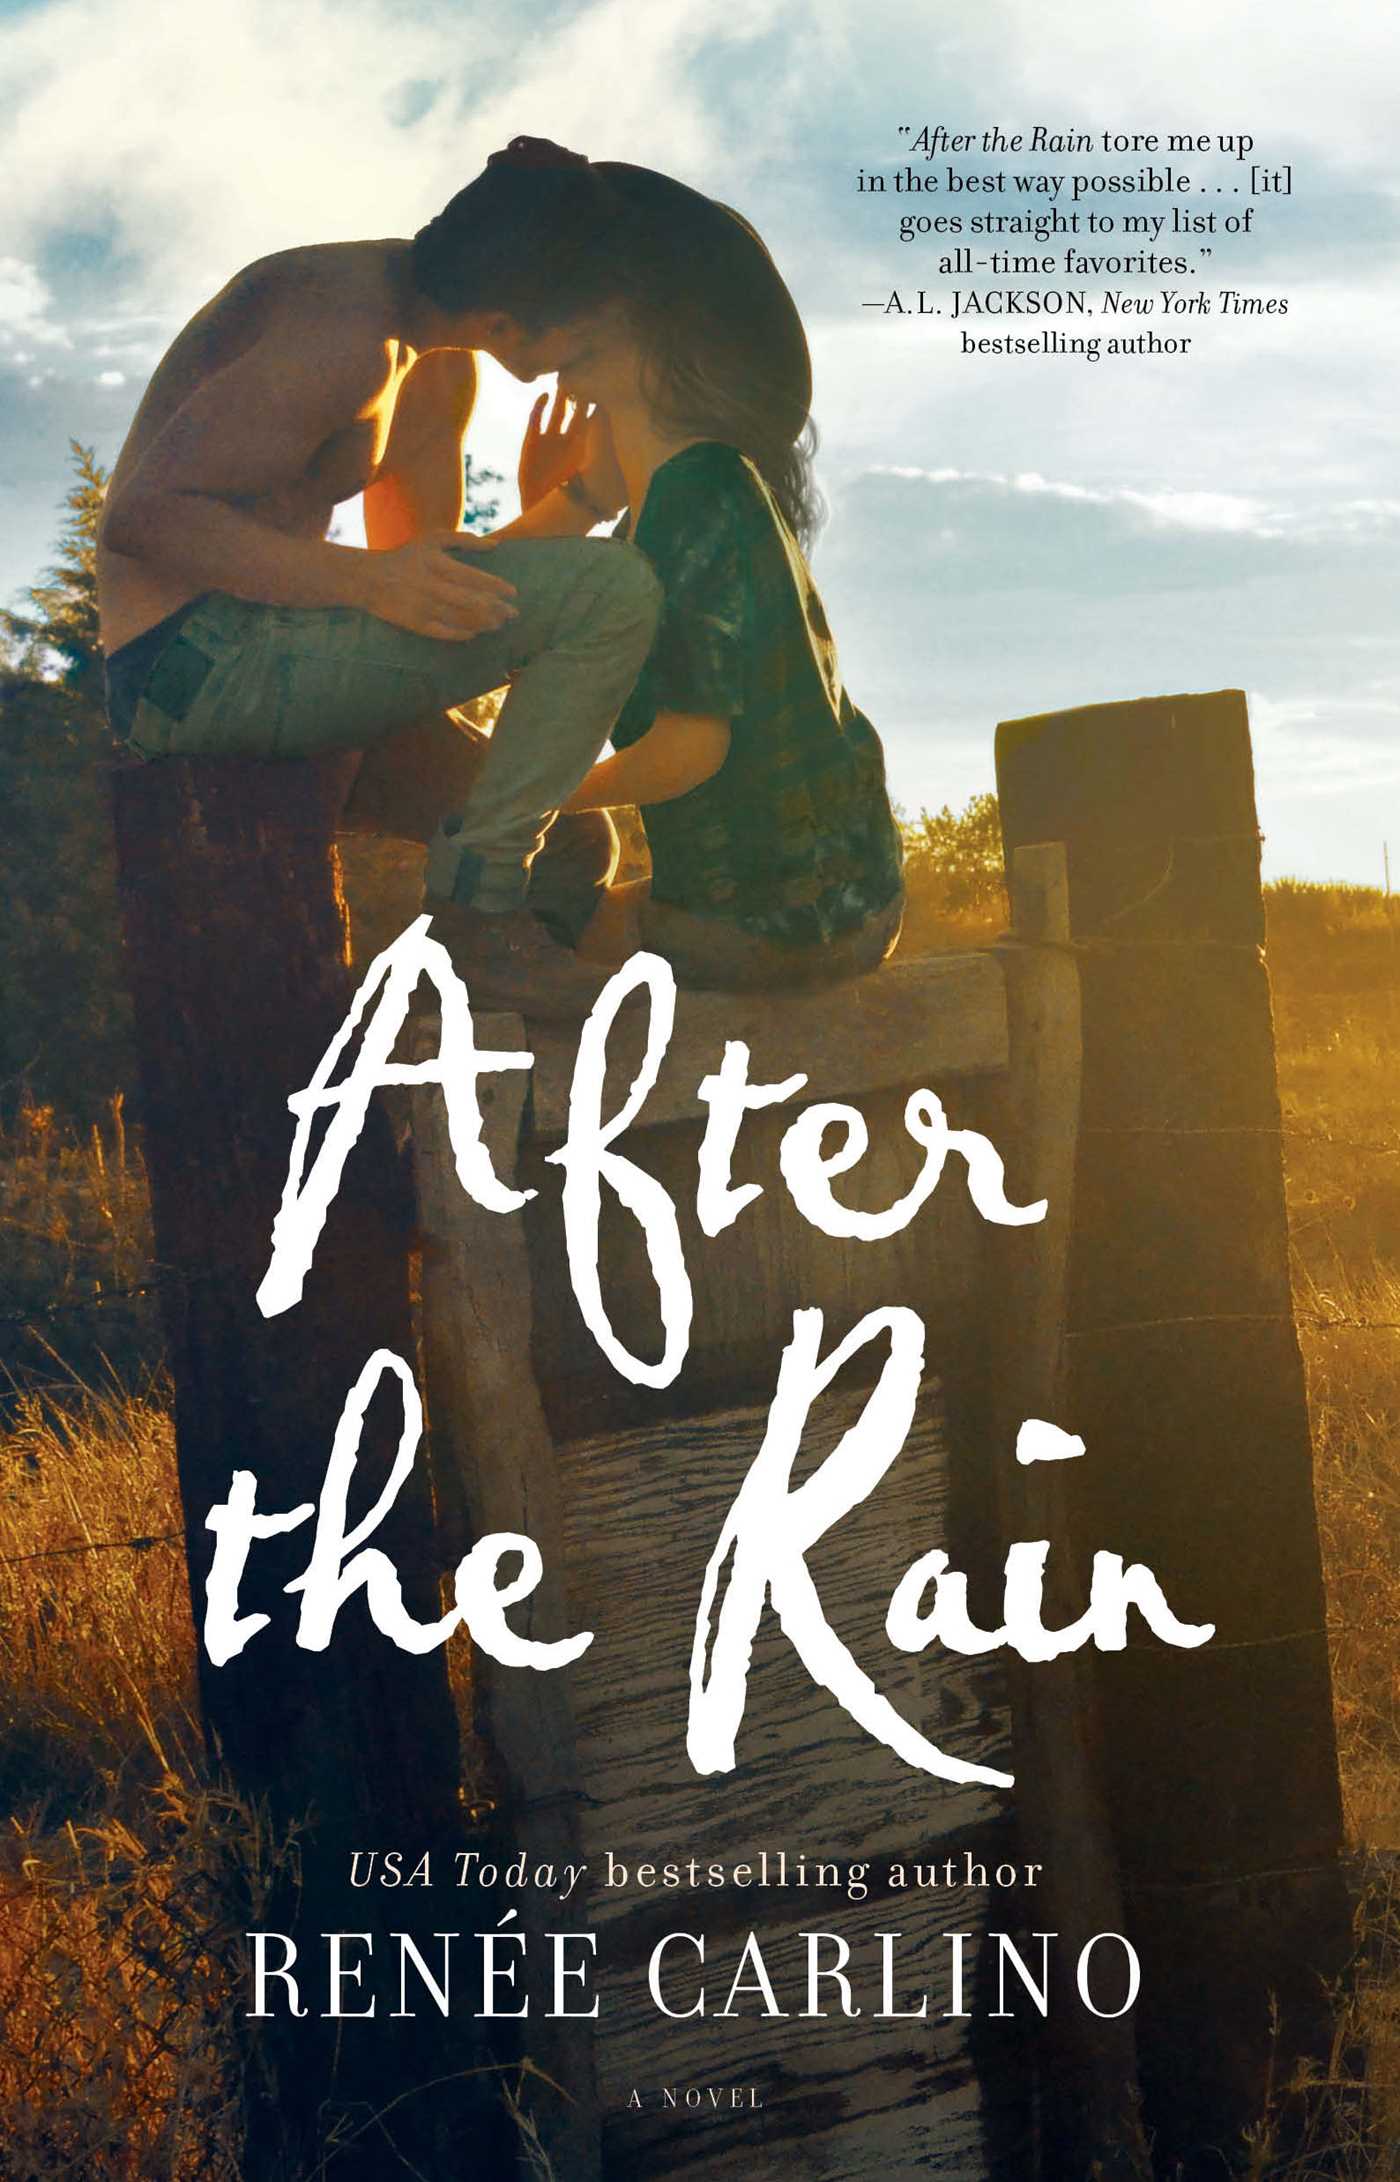 After the Rain eBook by Renée Carlino | Official Publisher Page ...